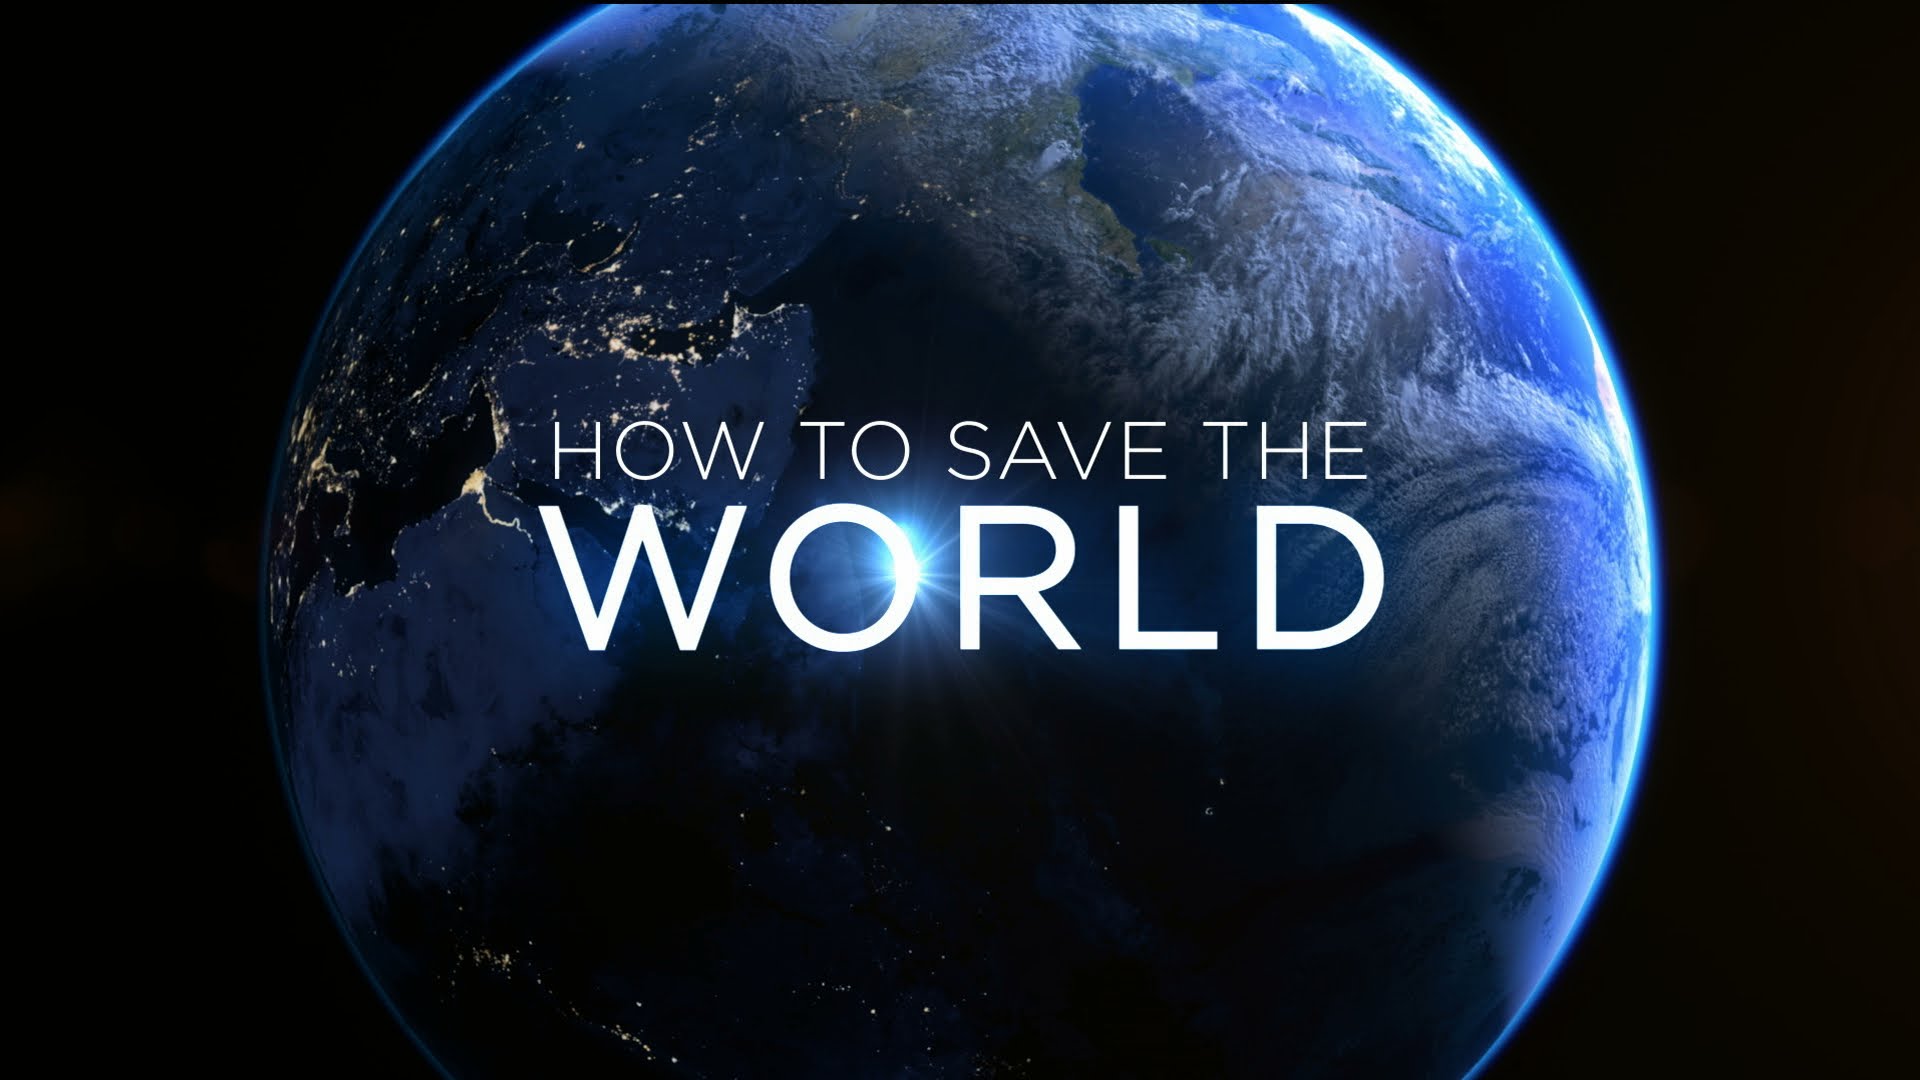 How to save. Save the World. Фото save the World. Надпись save the World. Save the World poster.